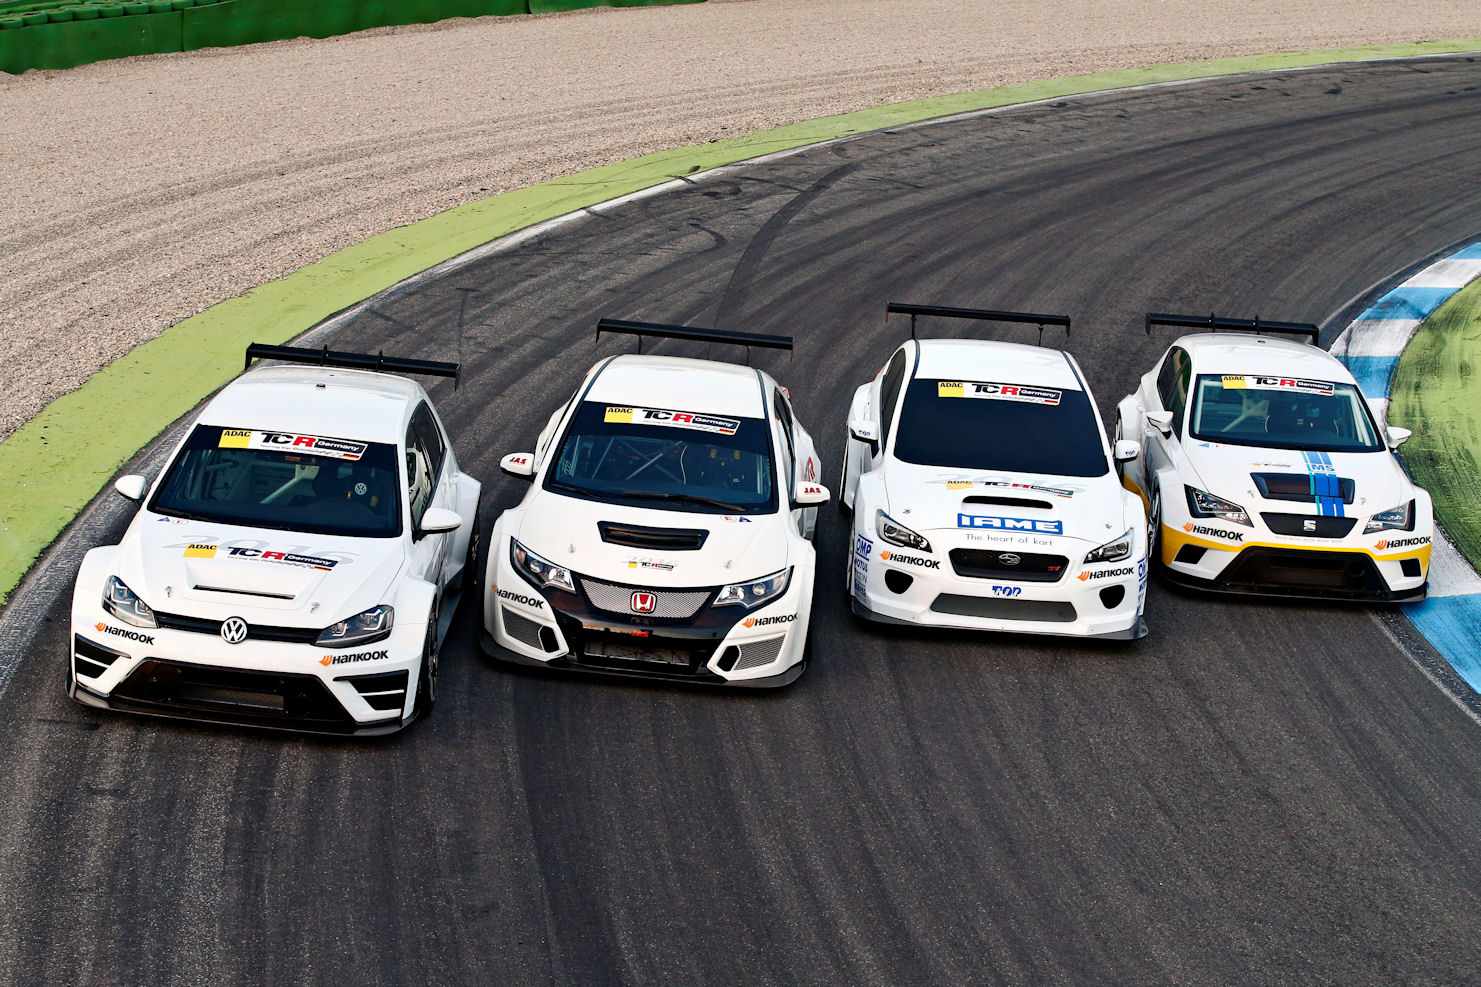 New touring car series to race exclusively on Hankook tyres - Tyrepress